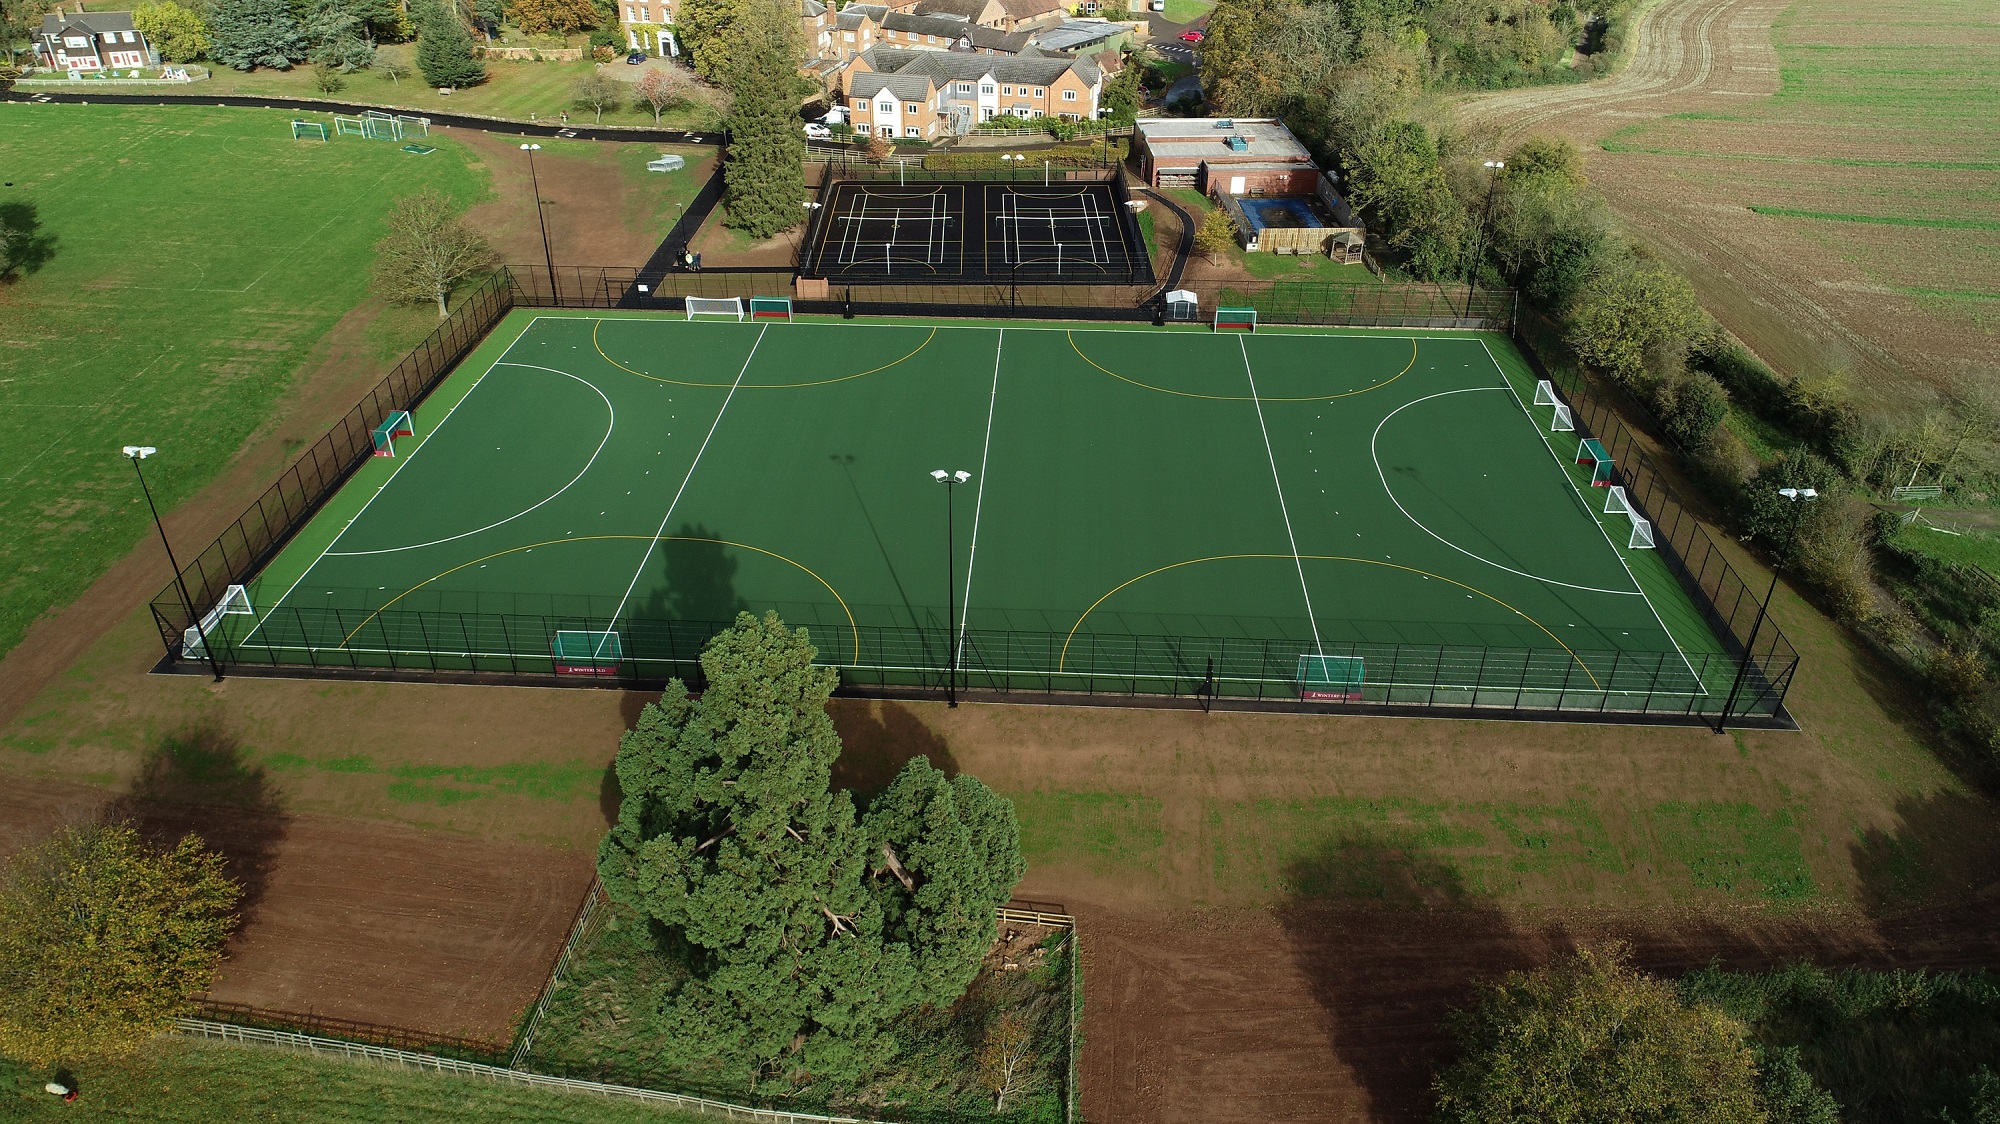 O’BRIEN ARE DELIGHTED THAT THEIR PITCH AT WINTERFOLD HAS BEEN FIH CERTIFIED!